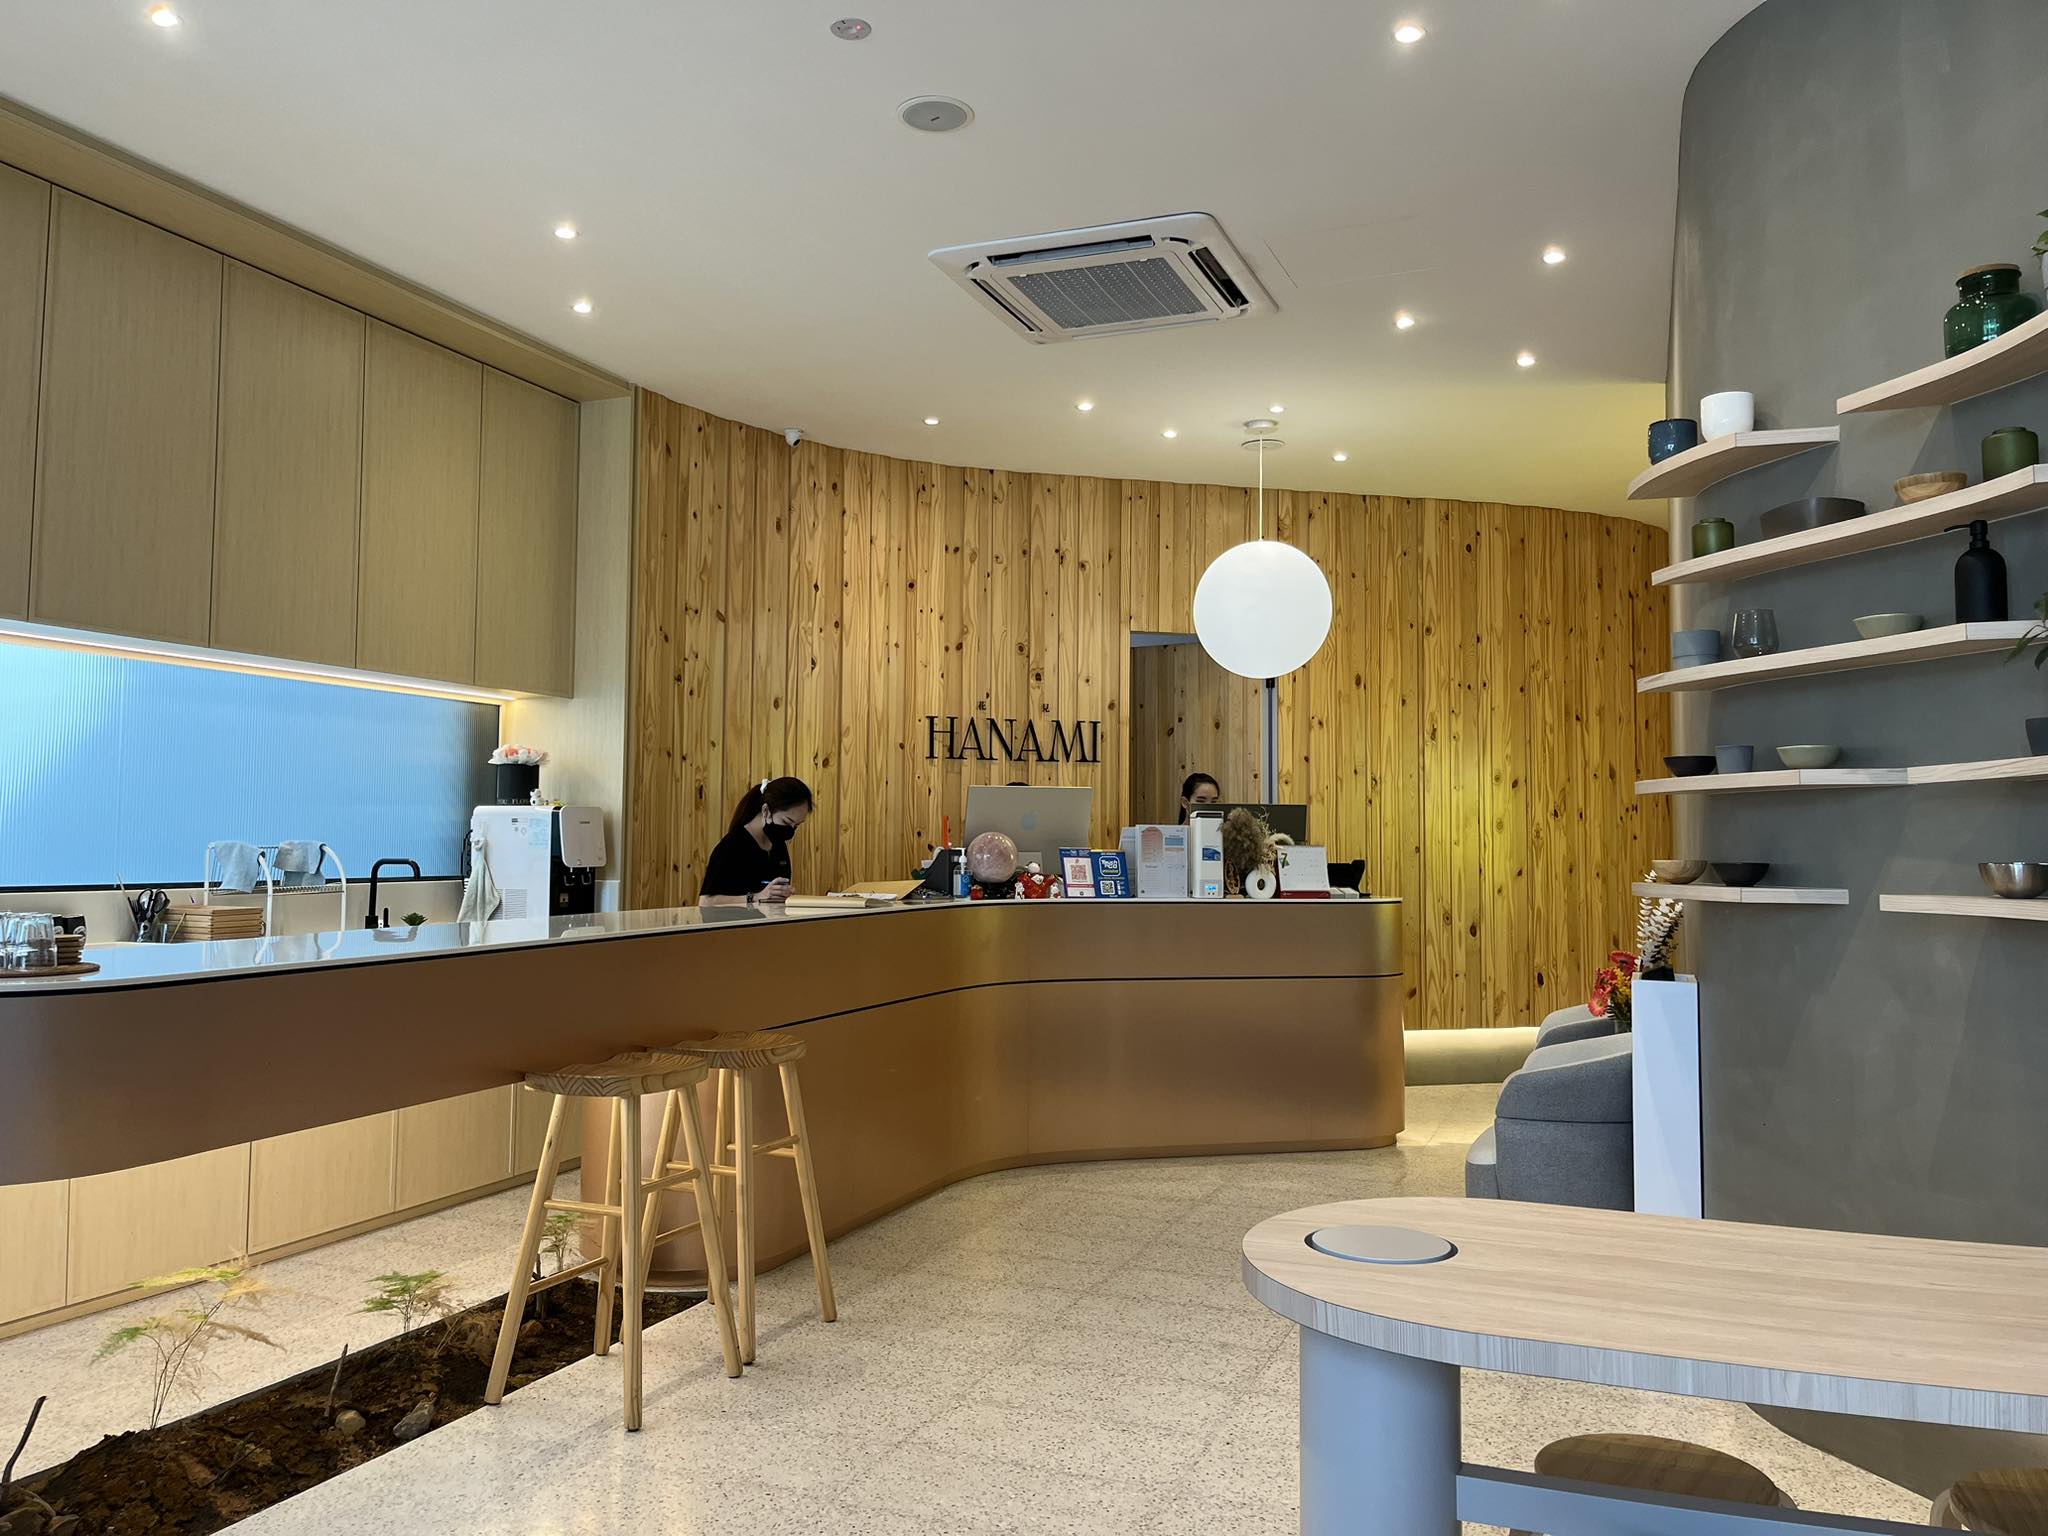 Hanami Japanese Onsen Spa In Puchong Offers Stone Baths & Heated Massages